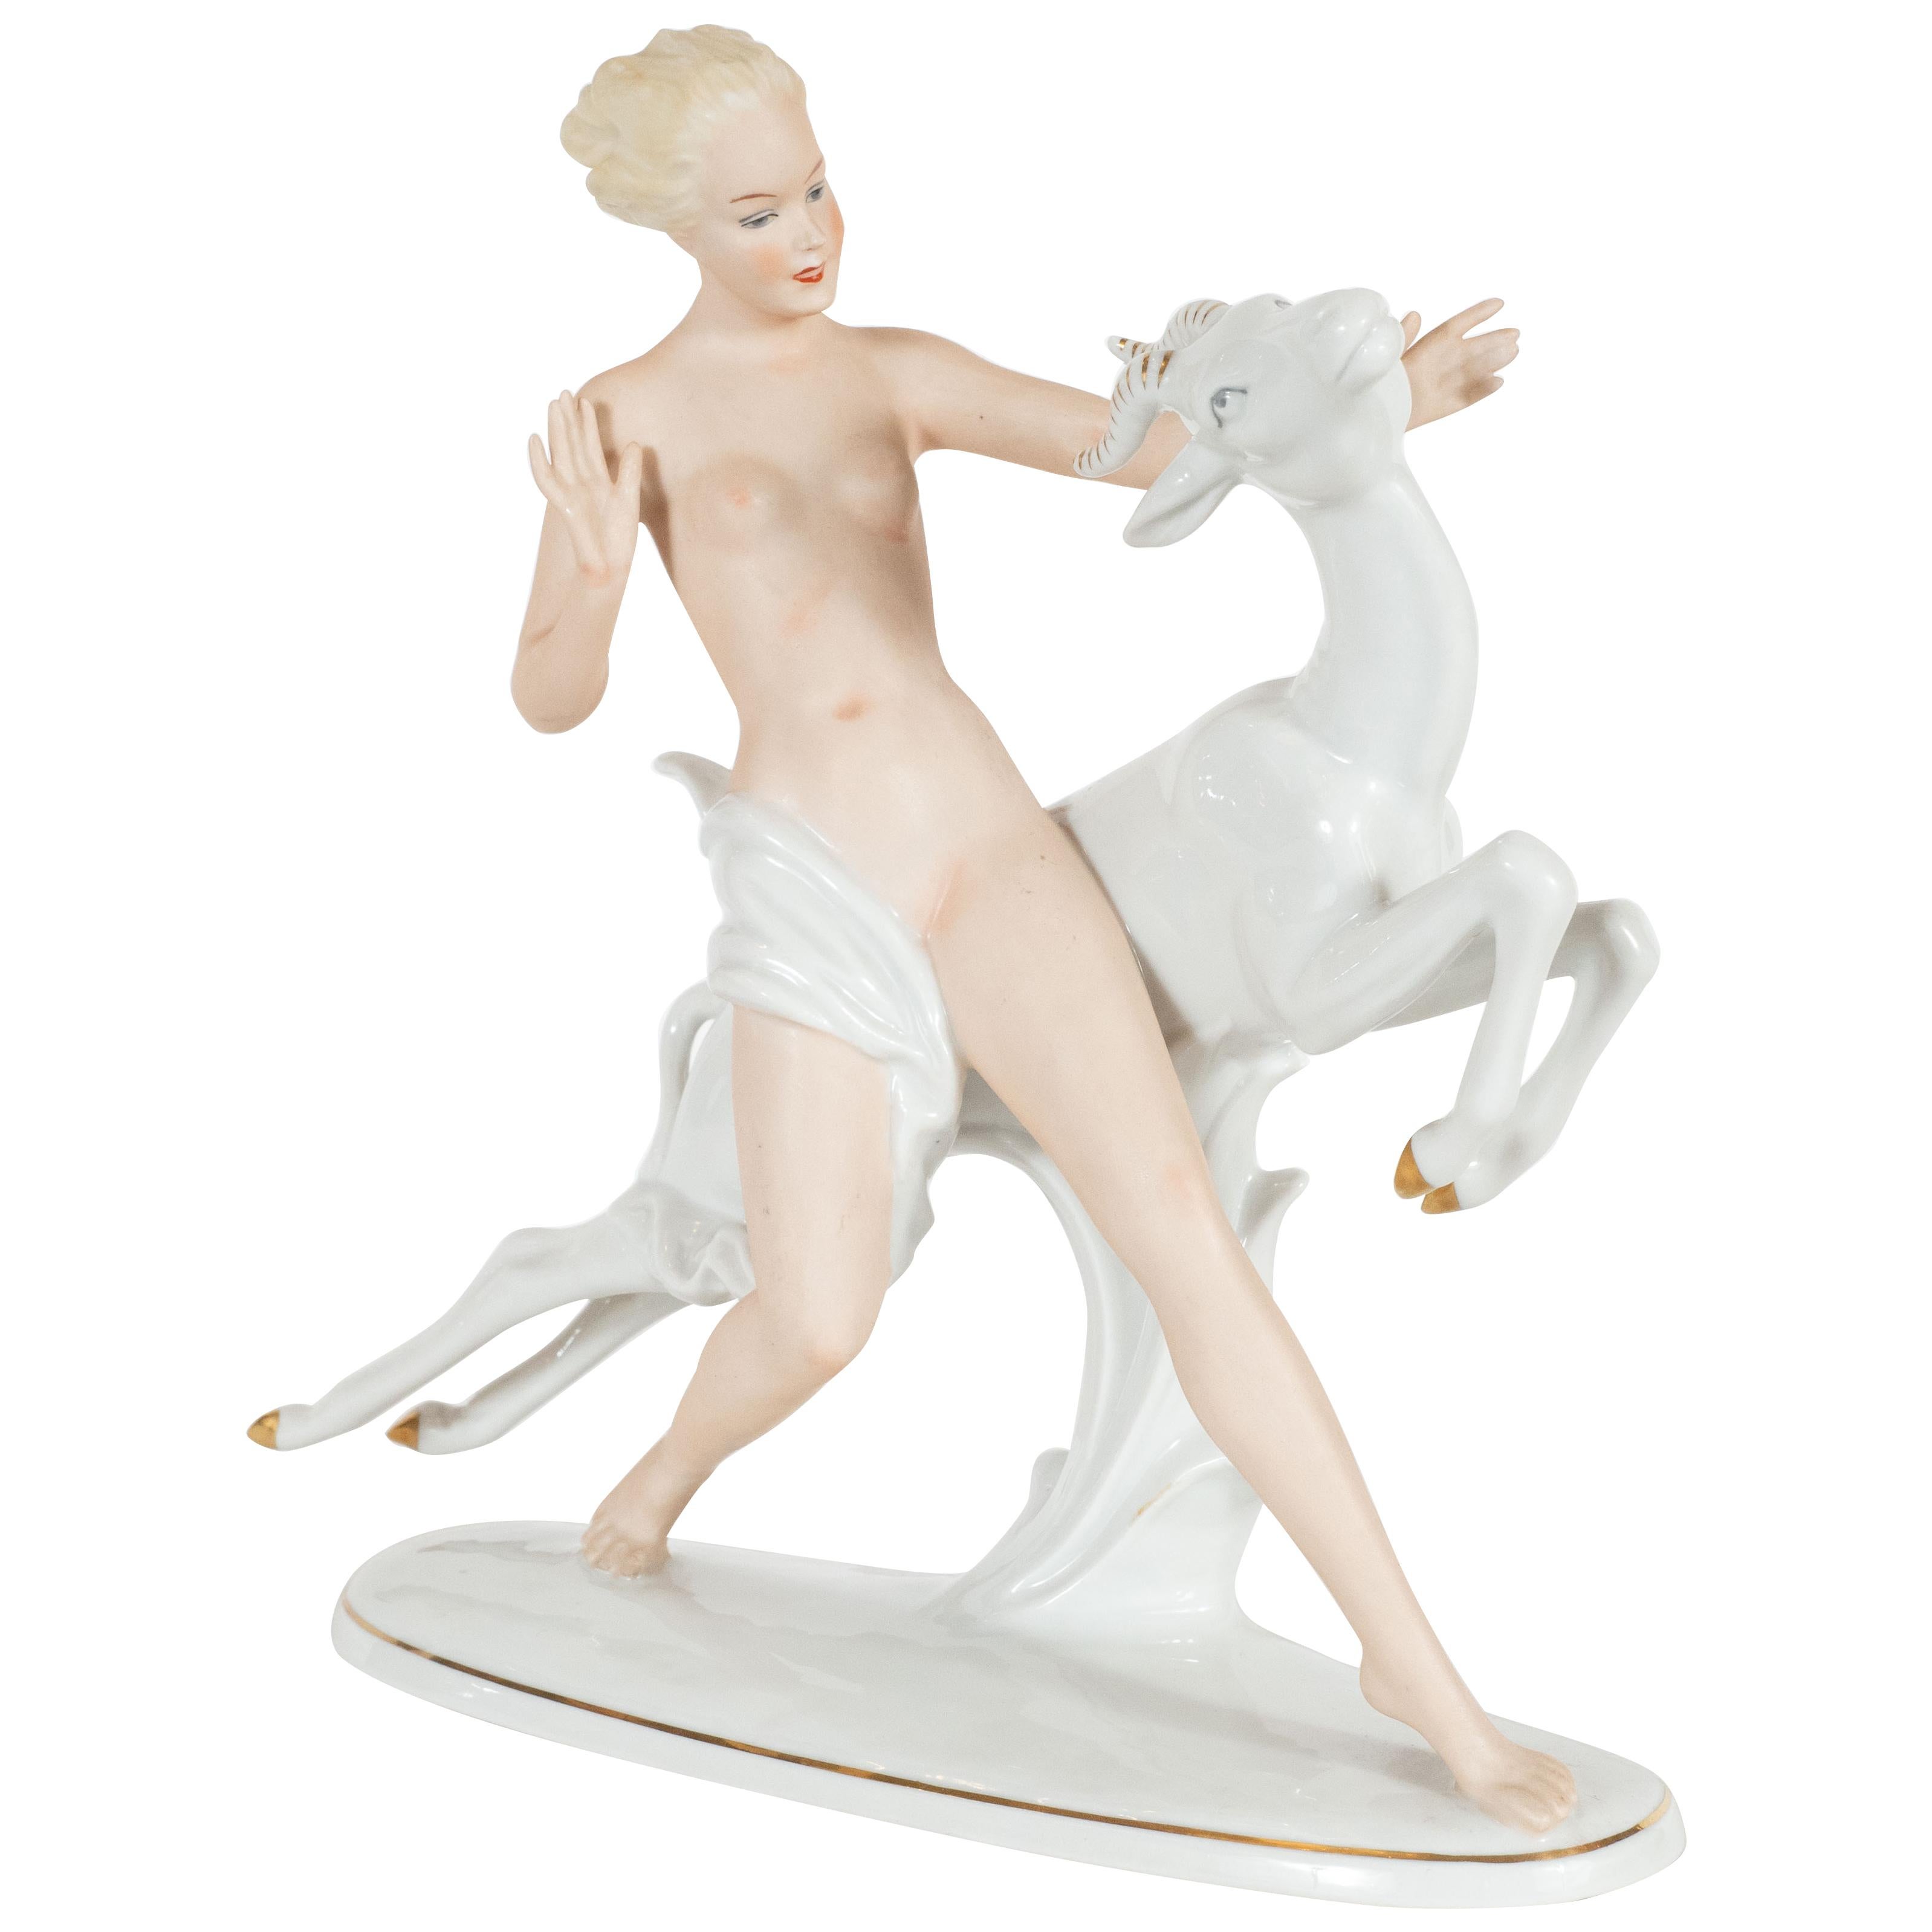 Art Deco Porcelain Statue of Female Figure with Leaping Ibex by Wallendorfer